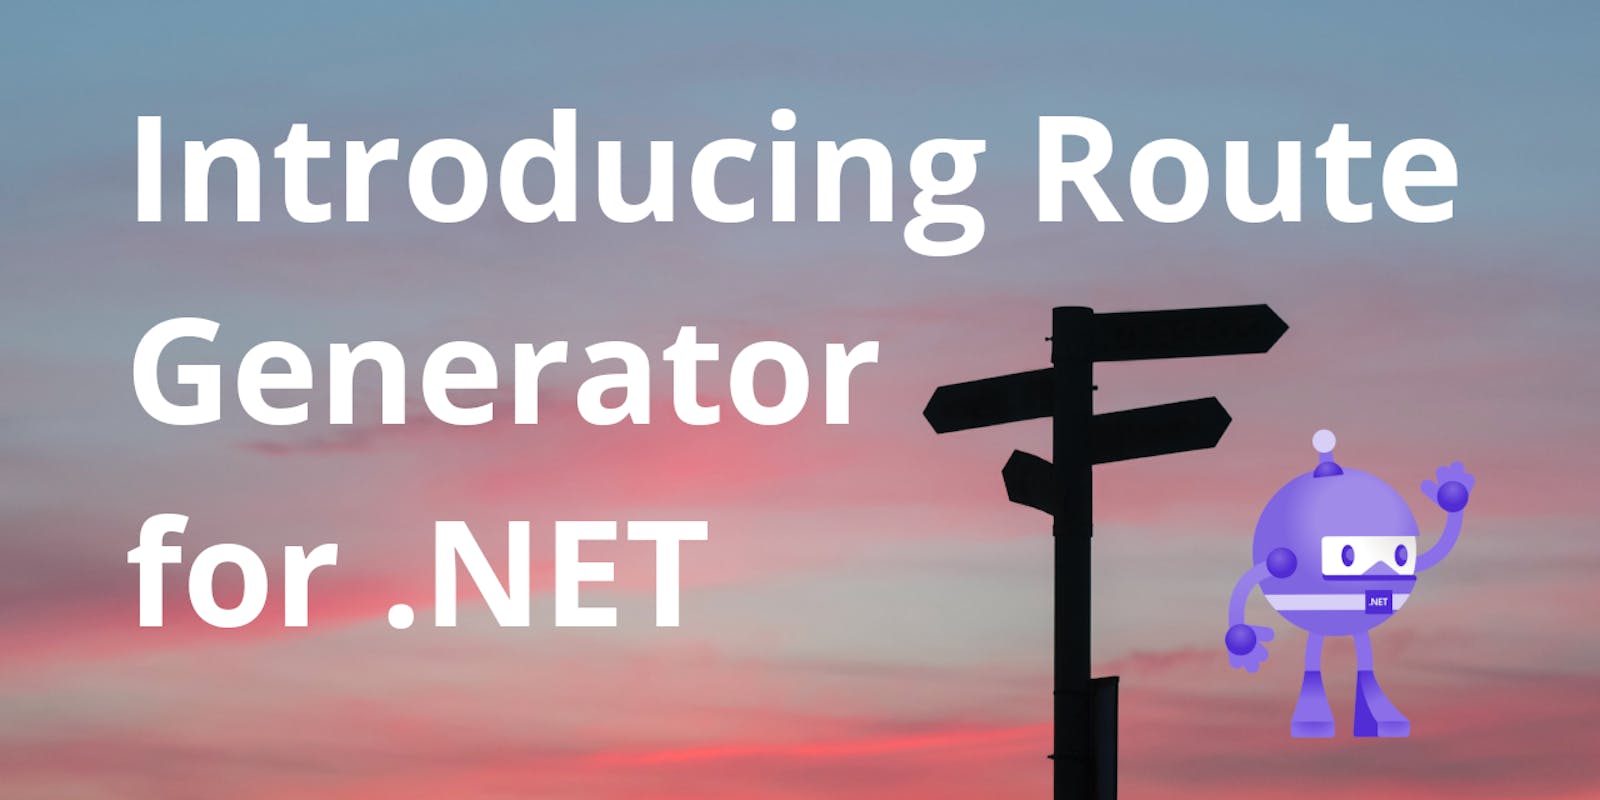 Introducing Route Generator for .NET